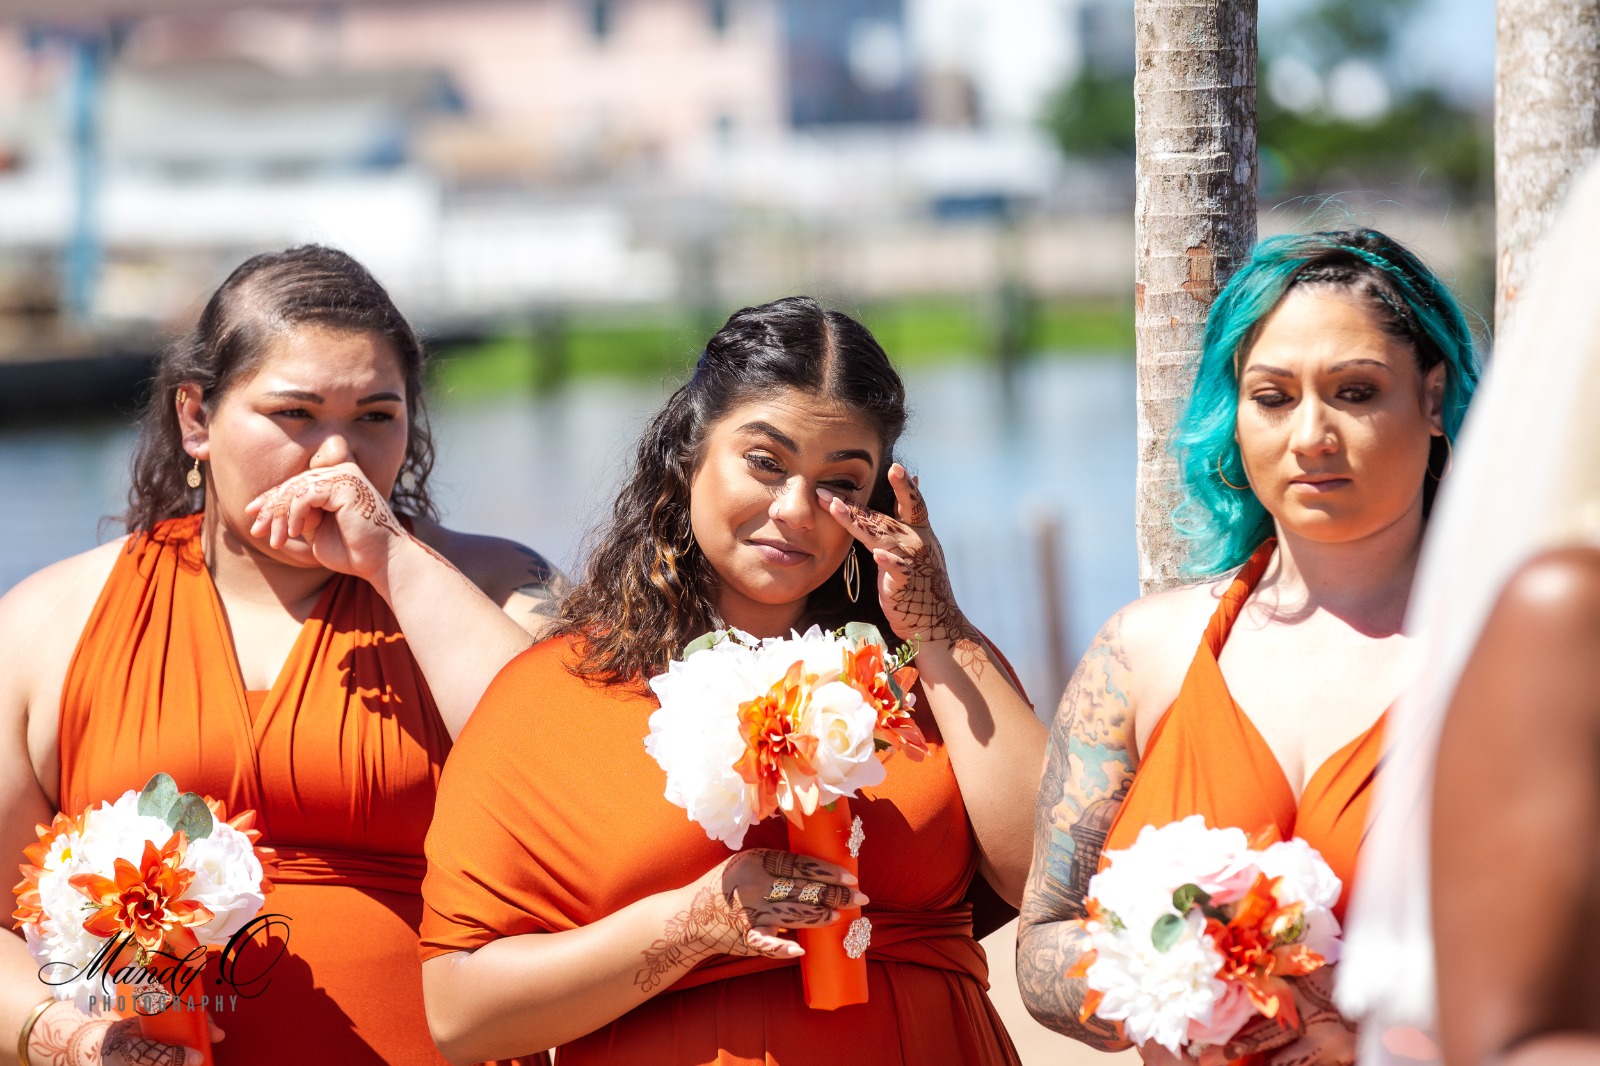 women in rust bridesmaid dresses with roses in hands.